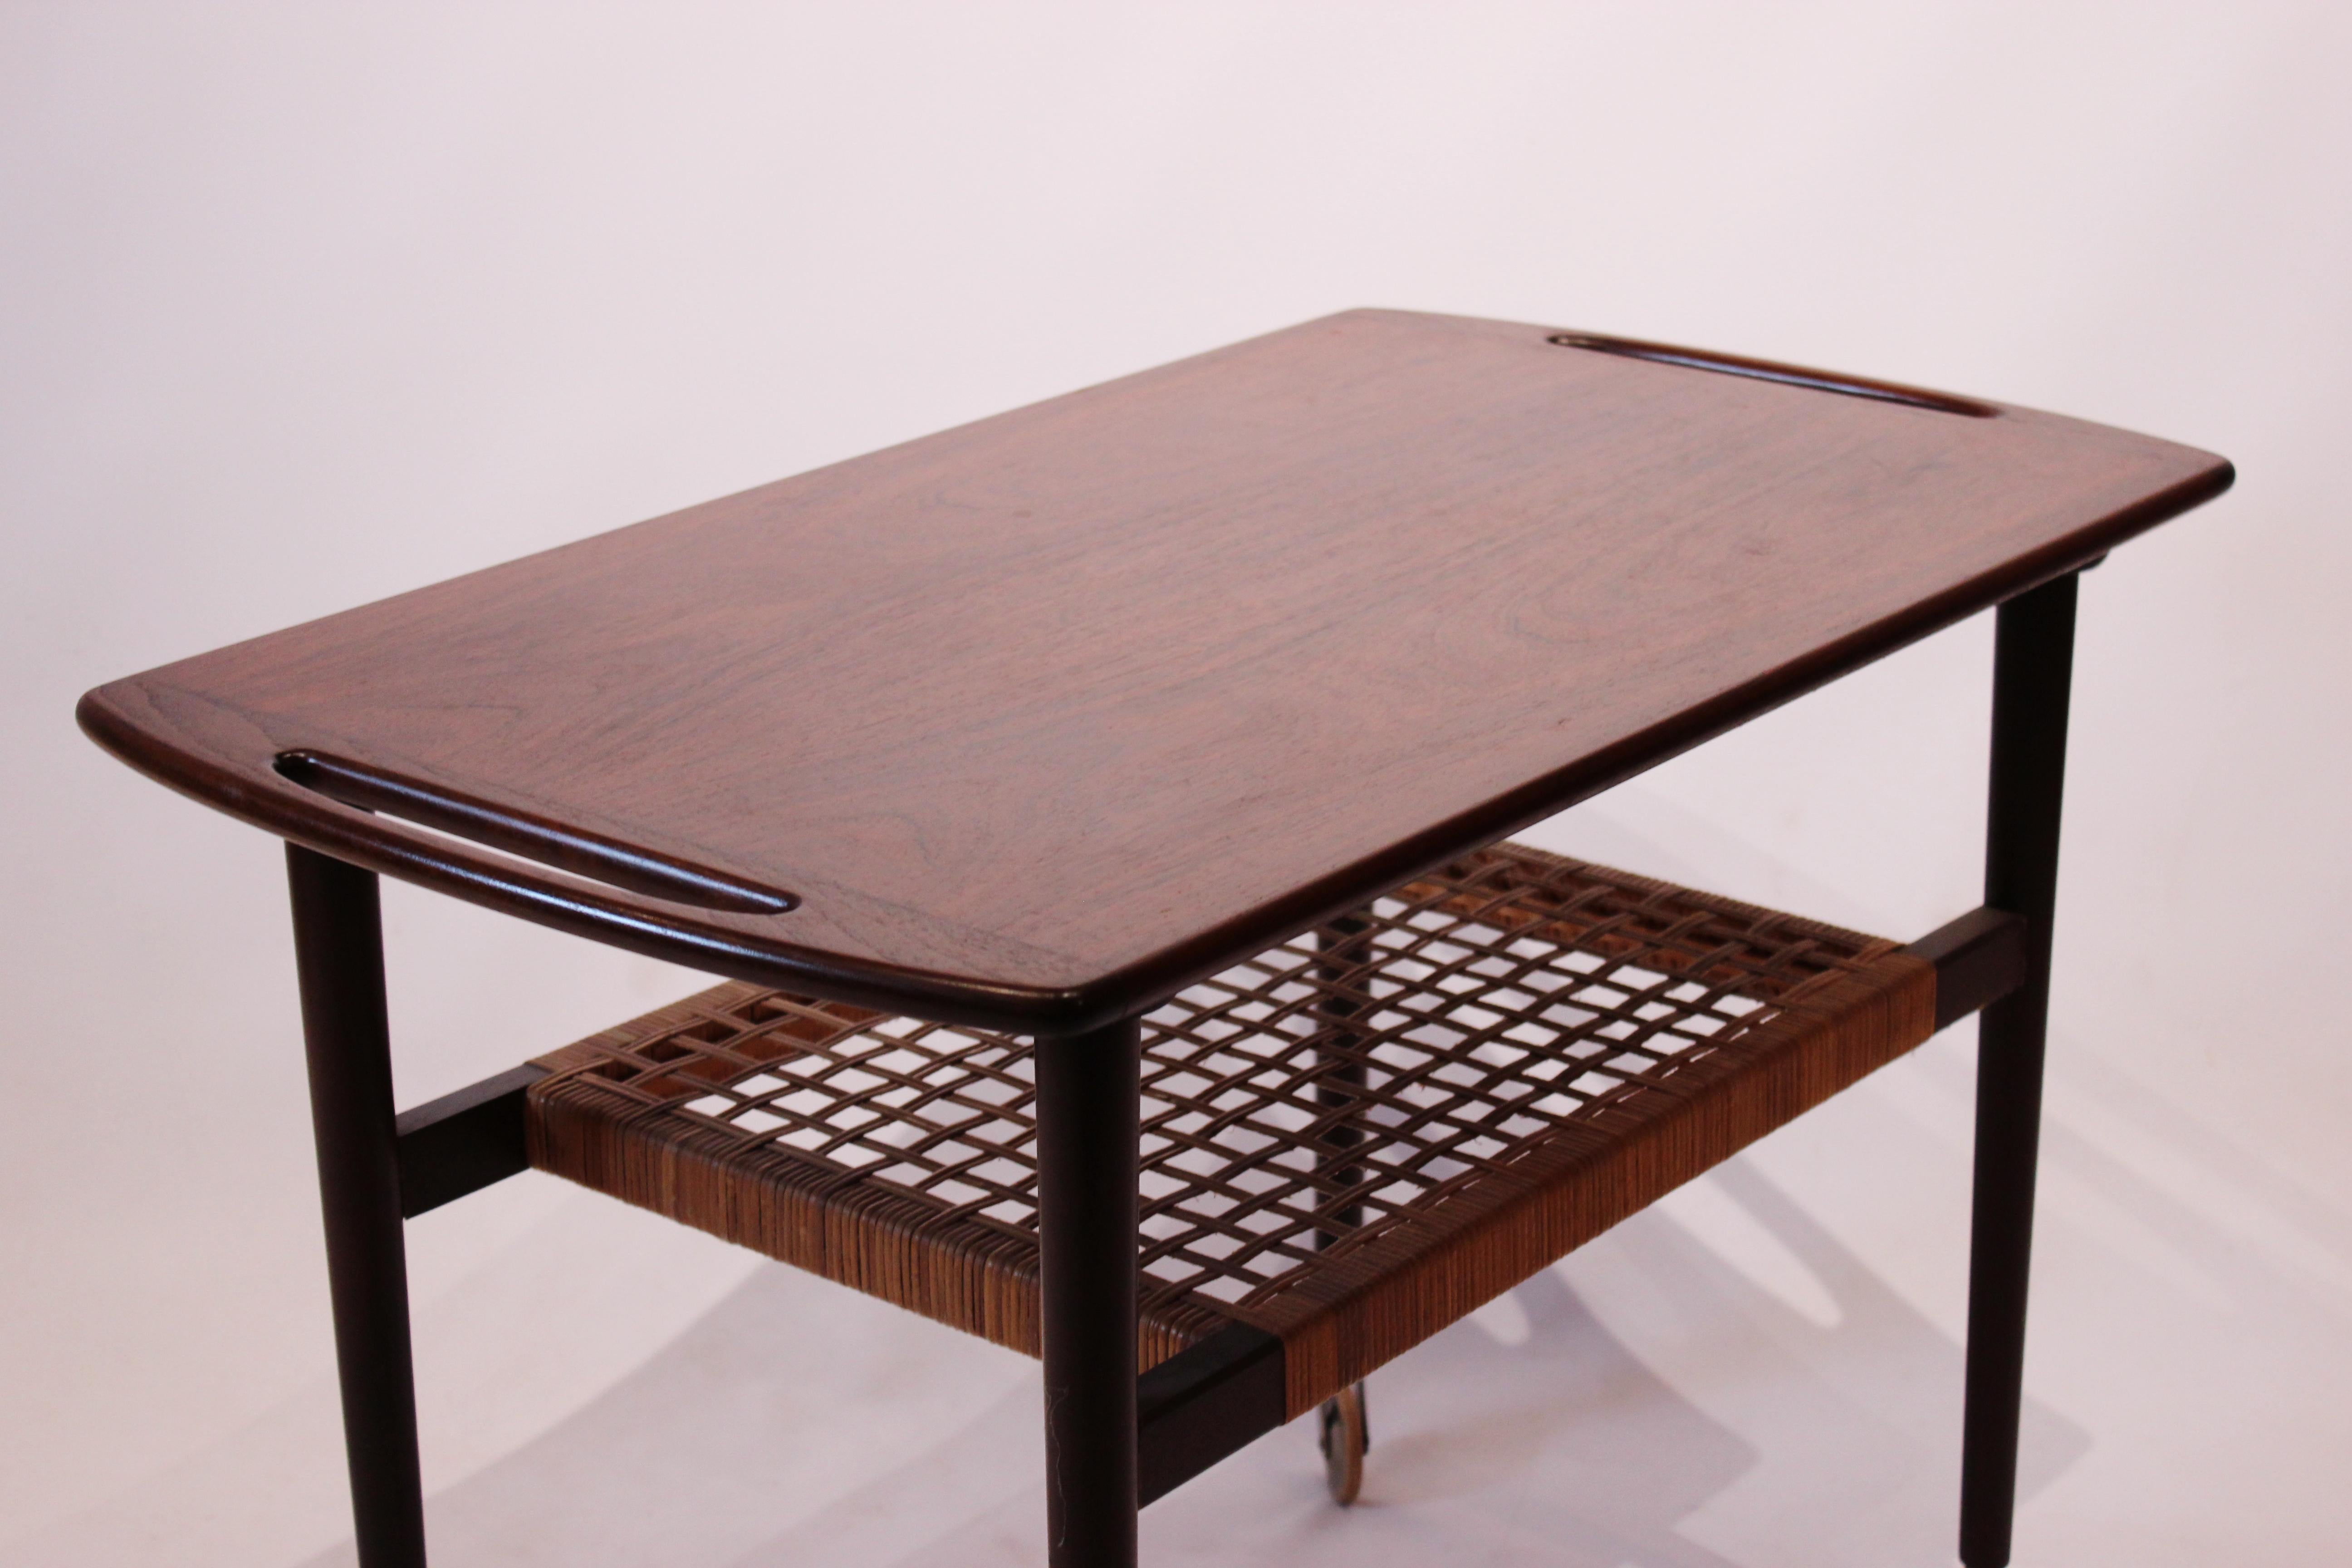 Mid-20th Century Side Table on Wheels in Rosewood, Danish Design, 1960s